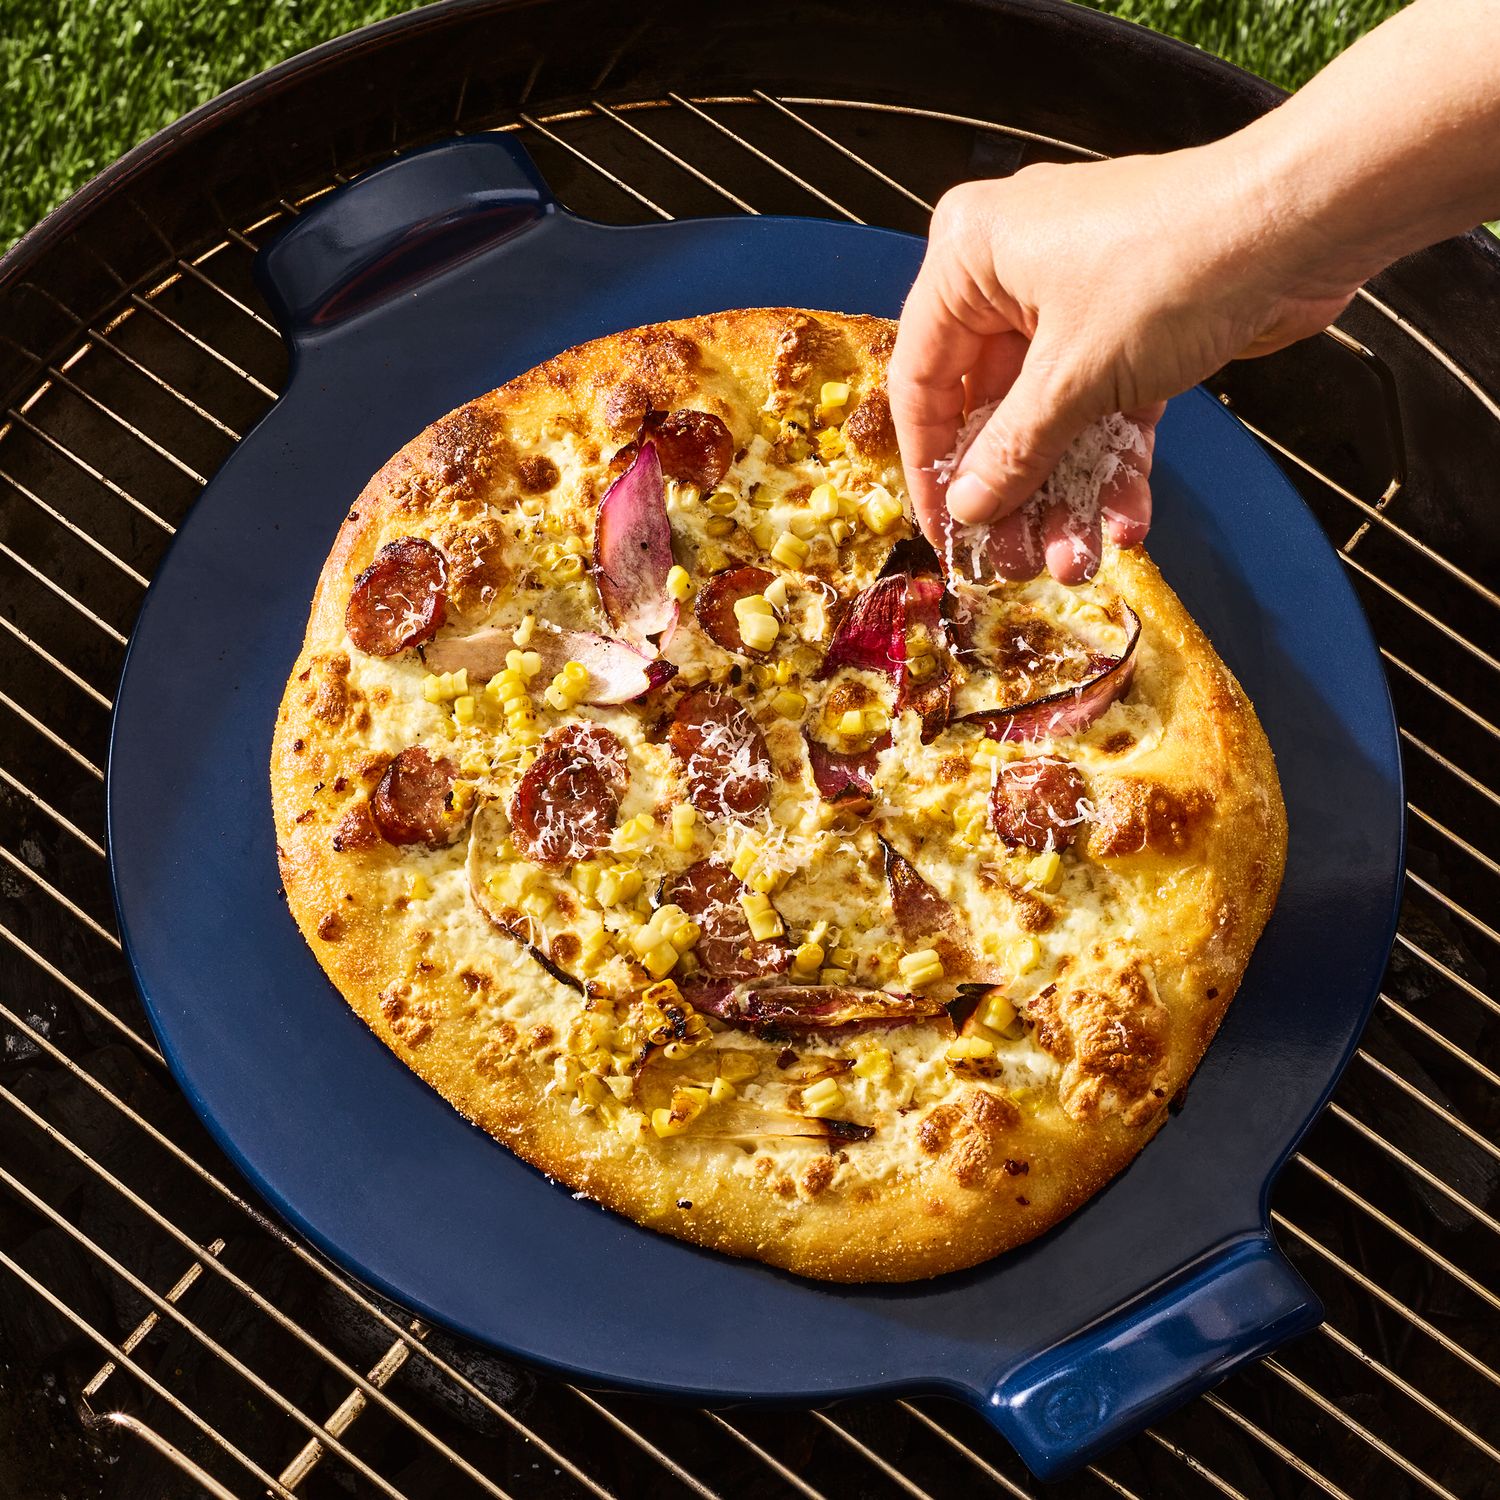 Emile Henry Square Pizza Stone - Charcoal